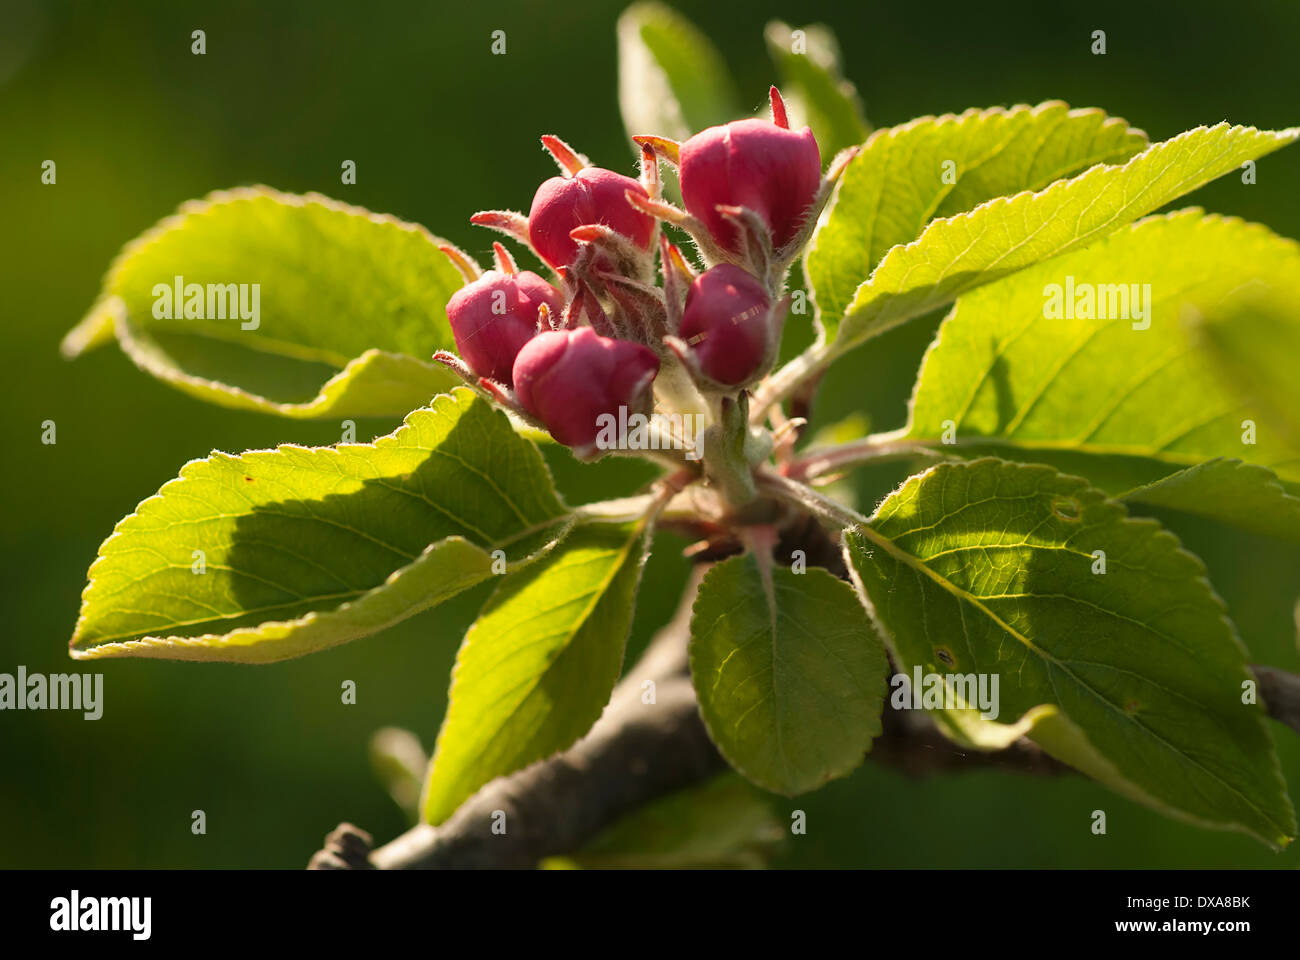 Pear, European pear, Pyrus communis 'Robin' sprig of unopened blossom buds with leaves. Backlit close view. Stock Photo